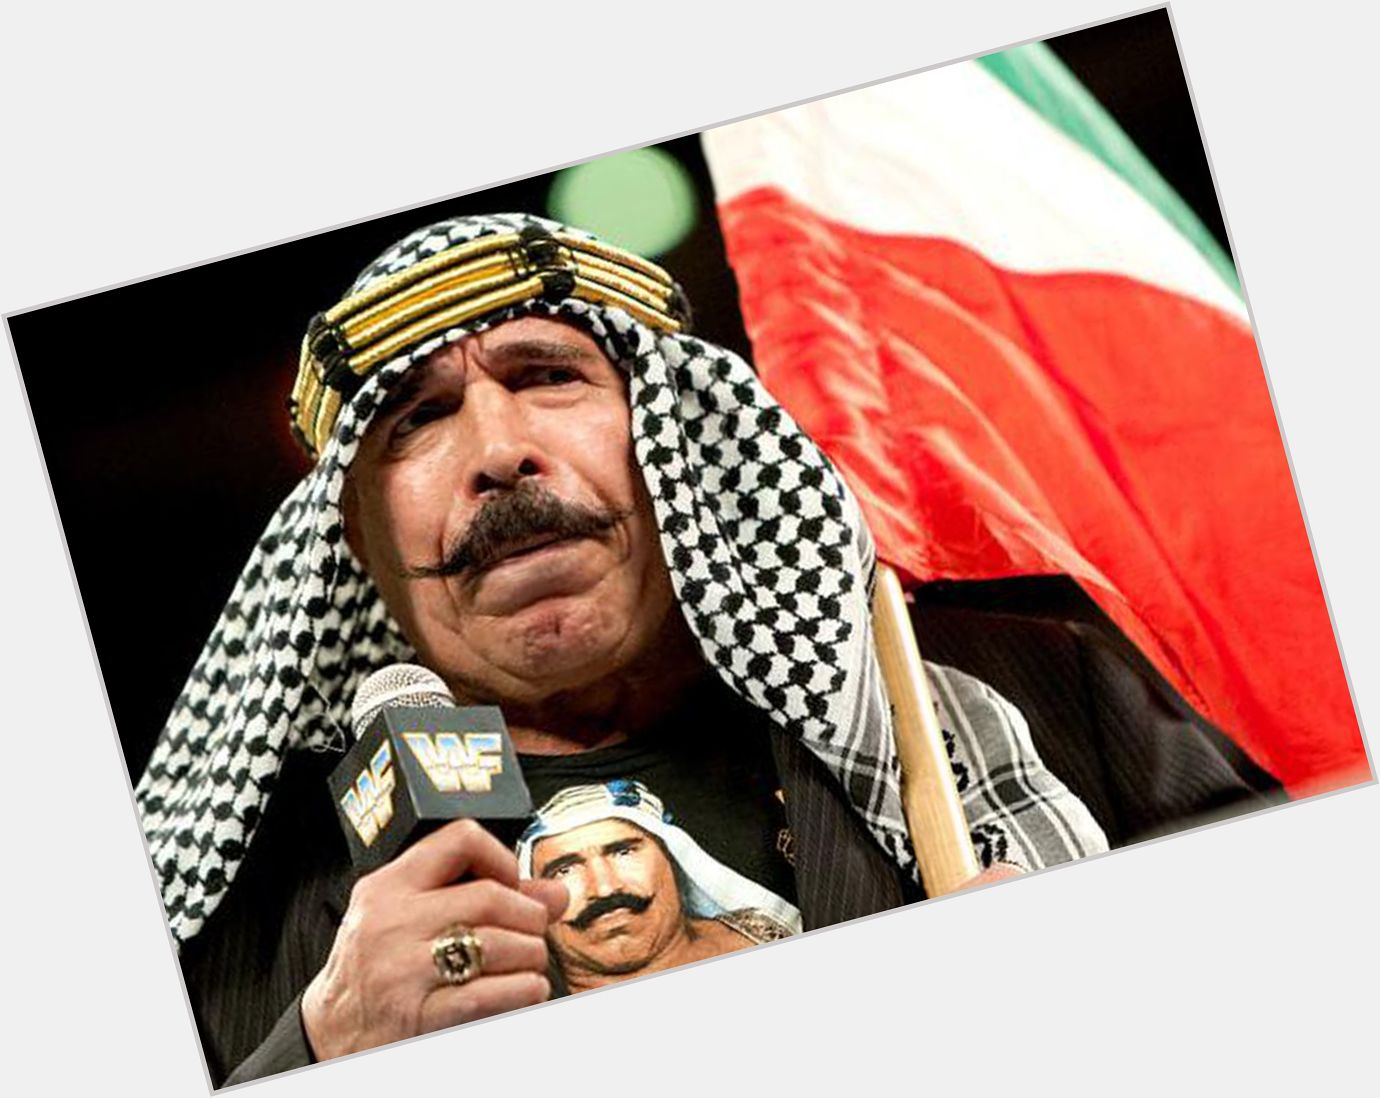 Happy Birthday to WWE Hall of Famer The Iron Sheik who turns 77 today! 